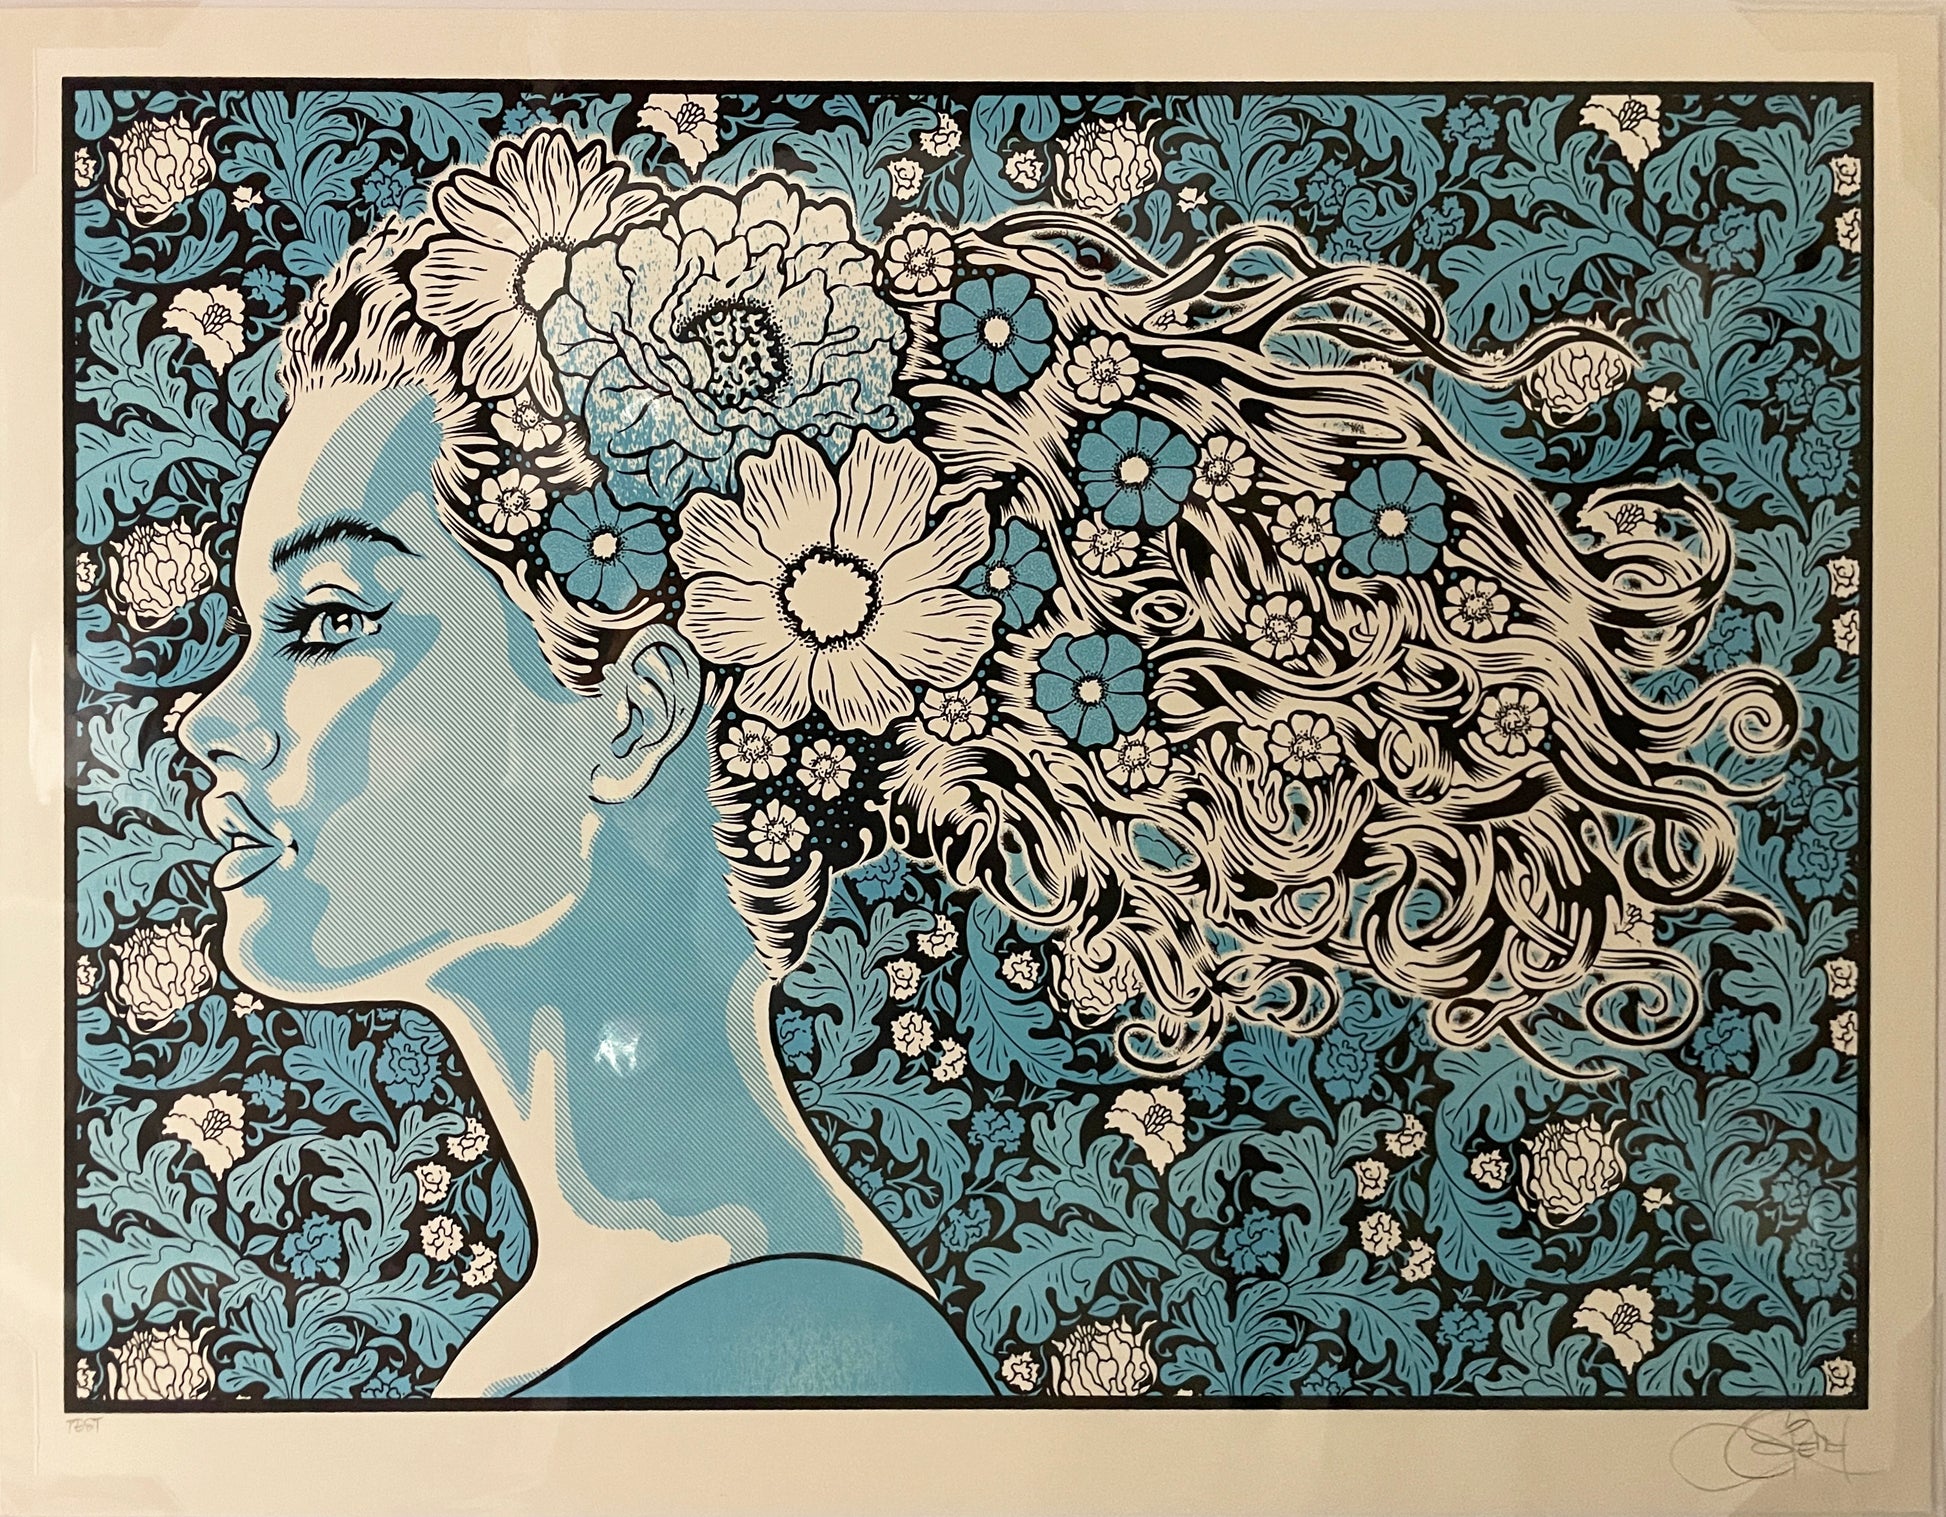  by Chuck Sperry titled Chuck Sperry - "Elysia" Test Print